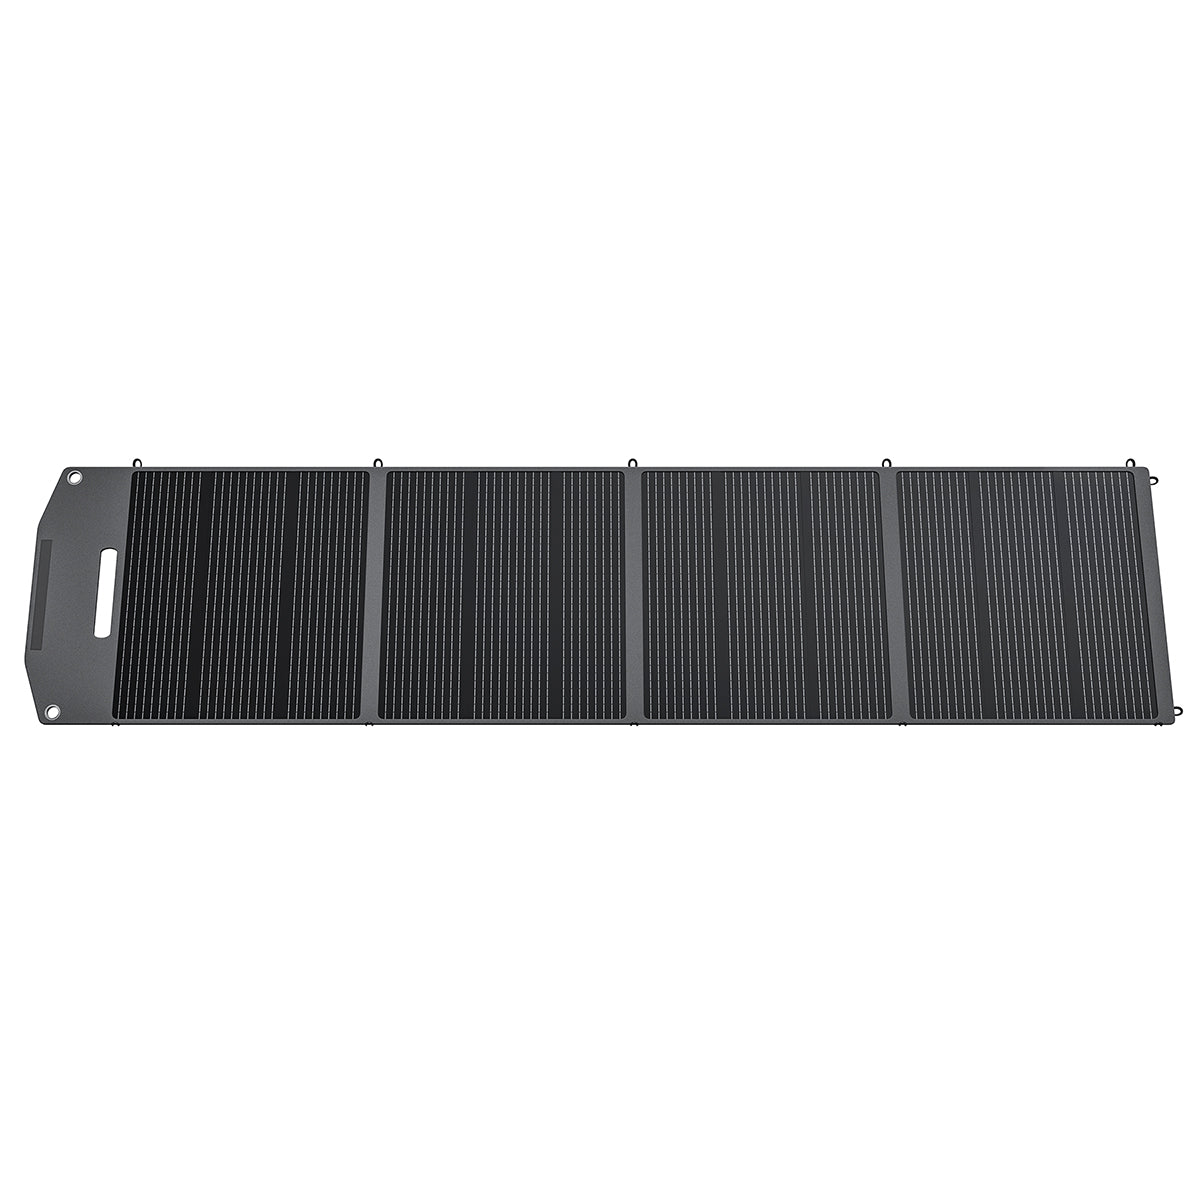 DBS200S Portable Solar Panel for Power Station | 200W